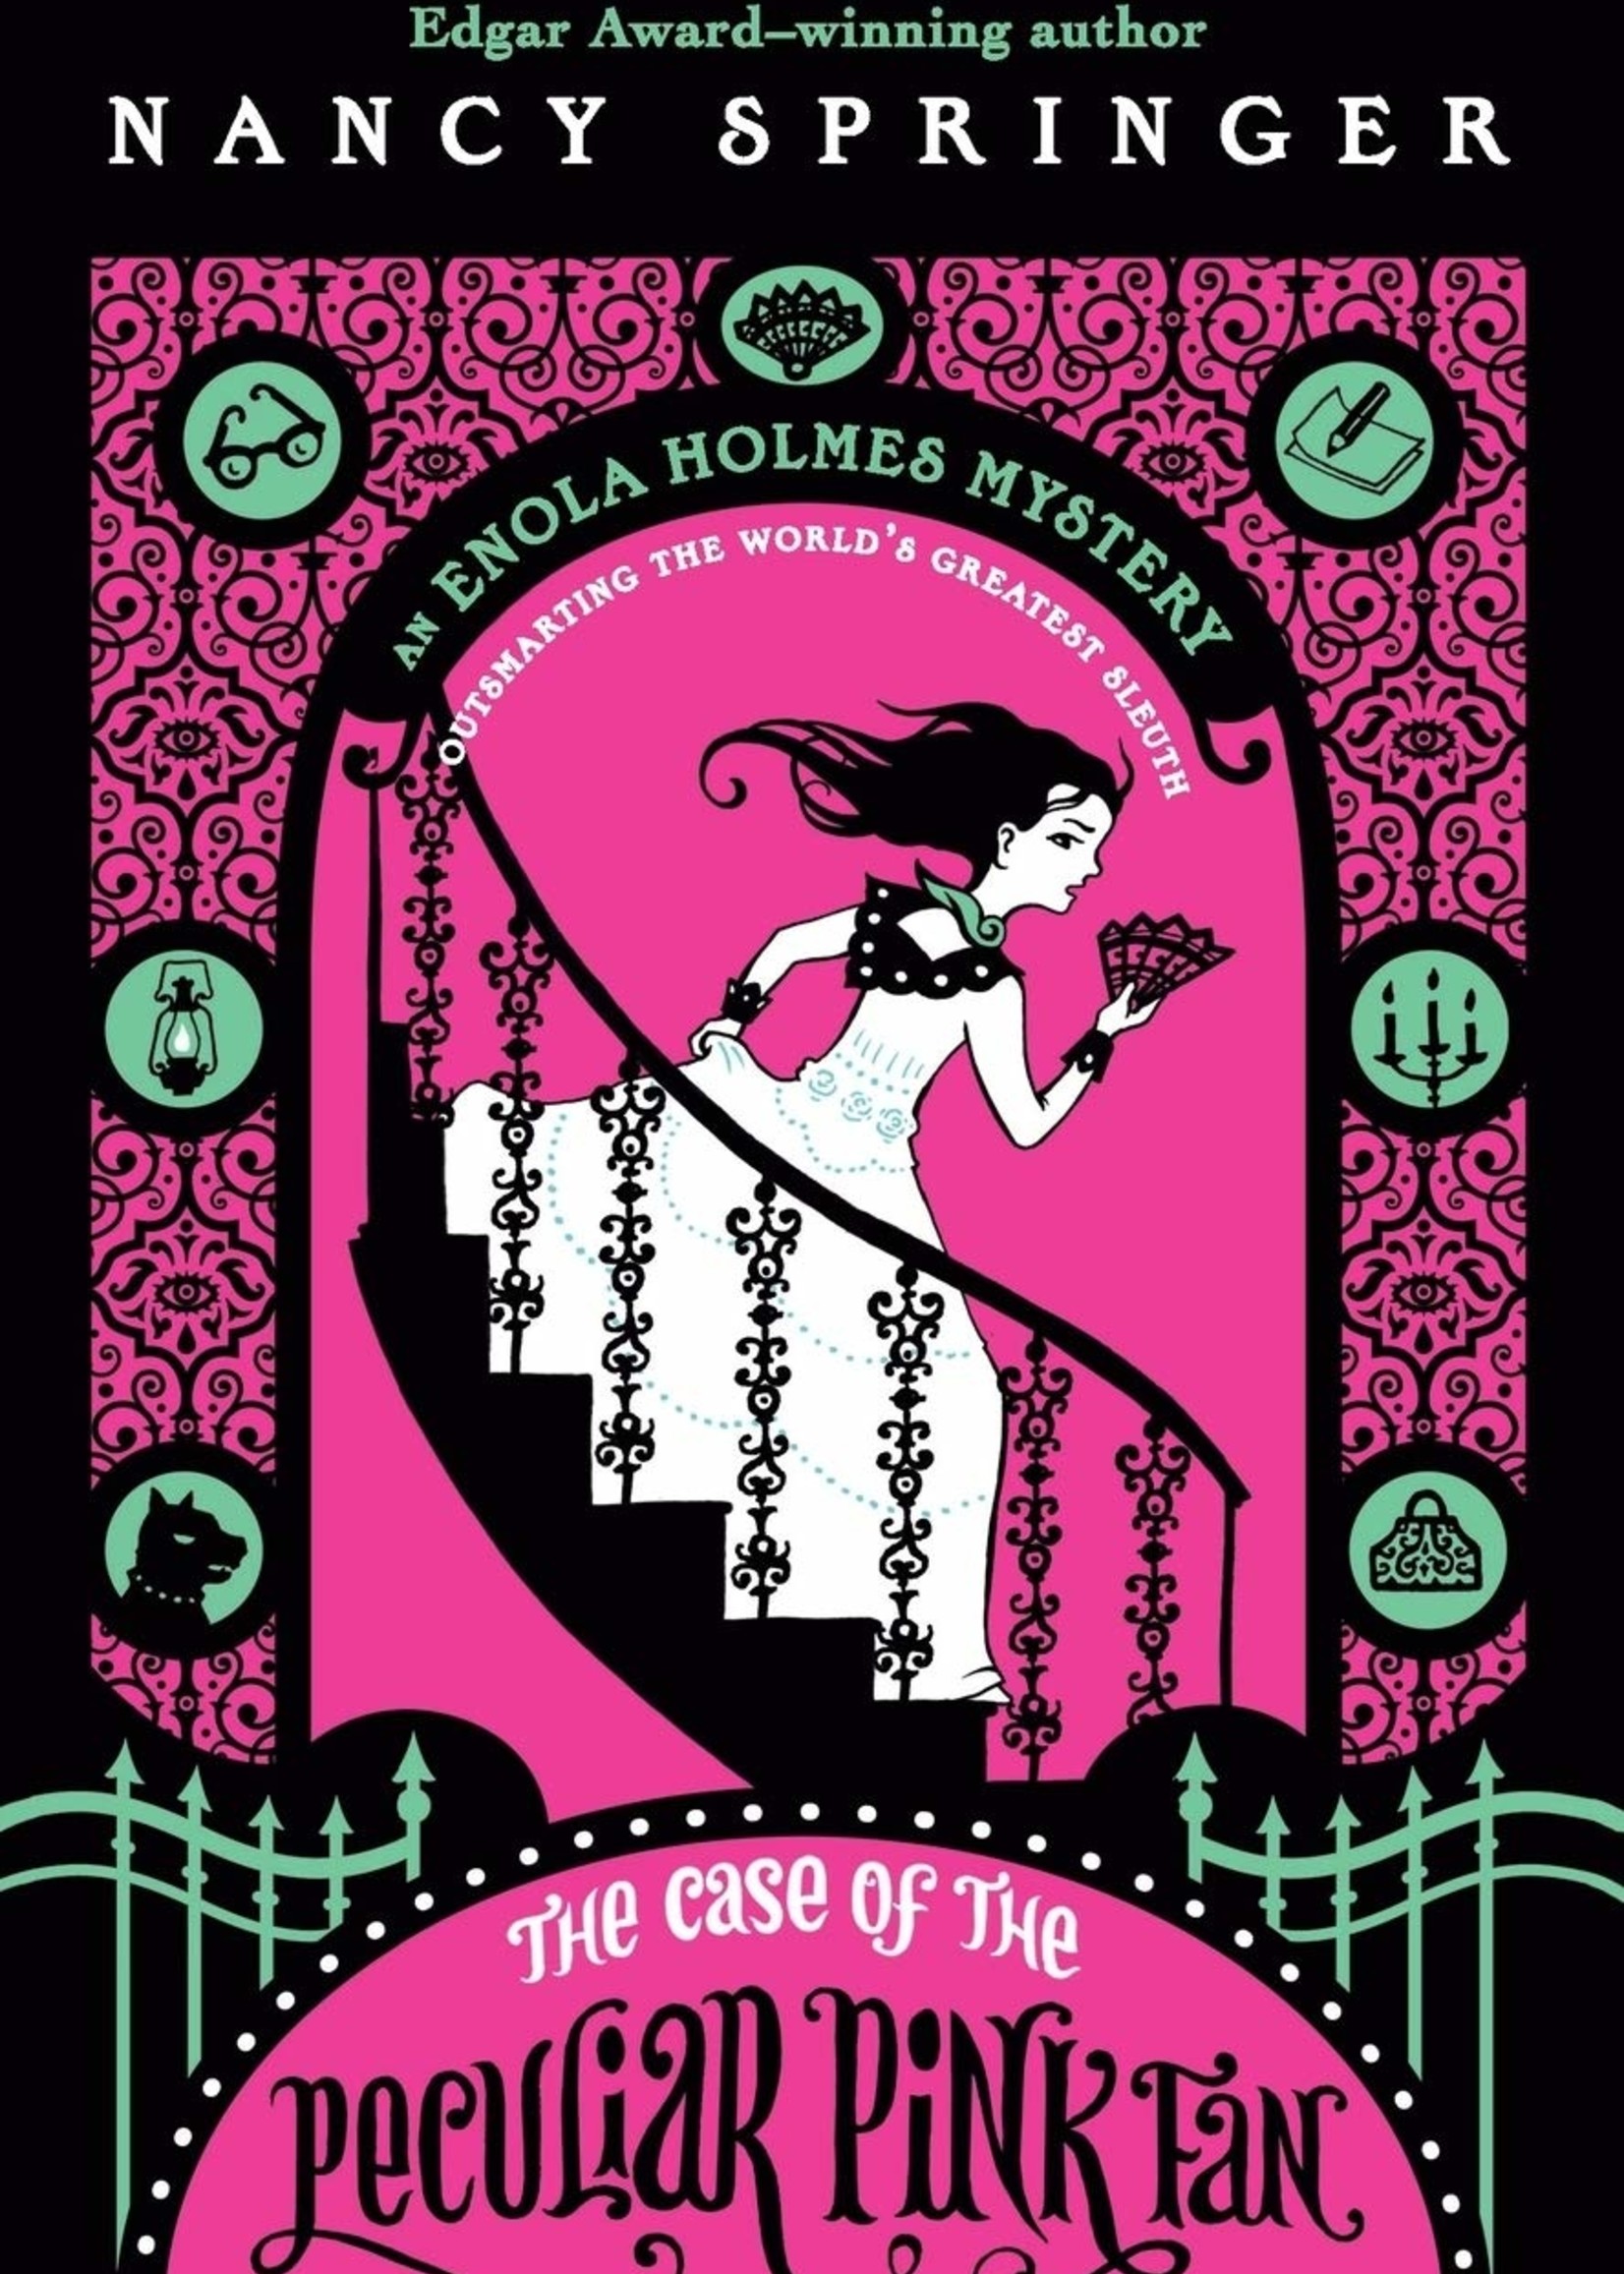 Enola Holmes Mystery #04, The Case of the Peculiar Pink Fan - Paperback